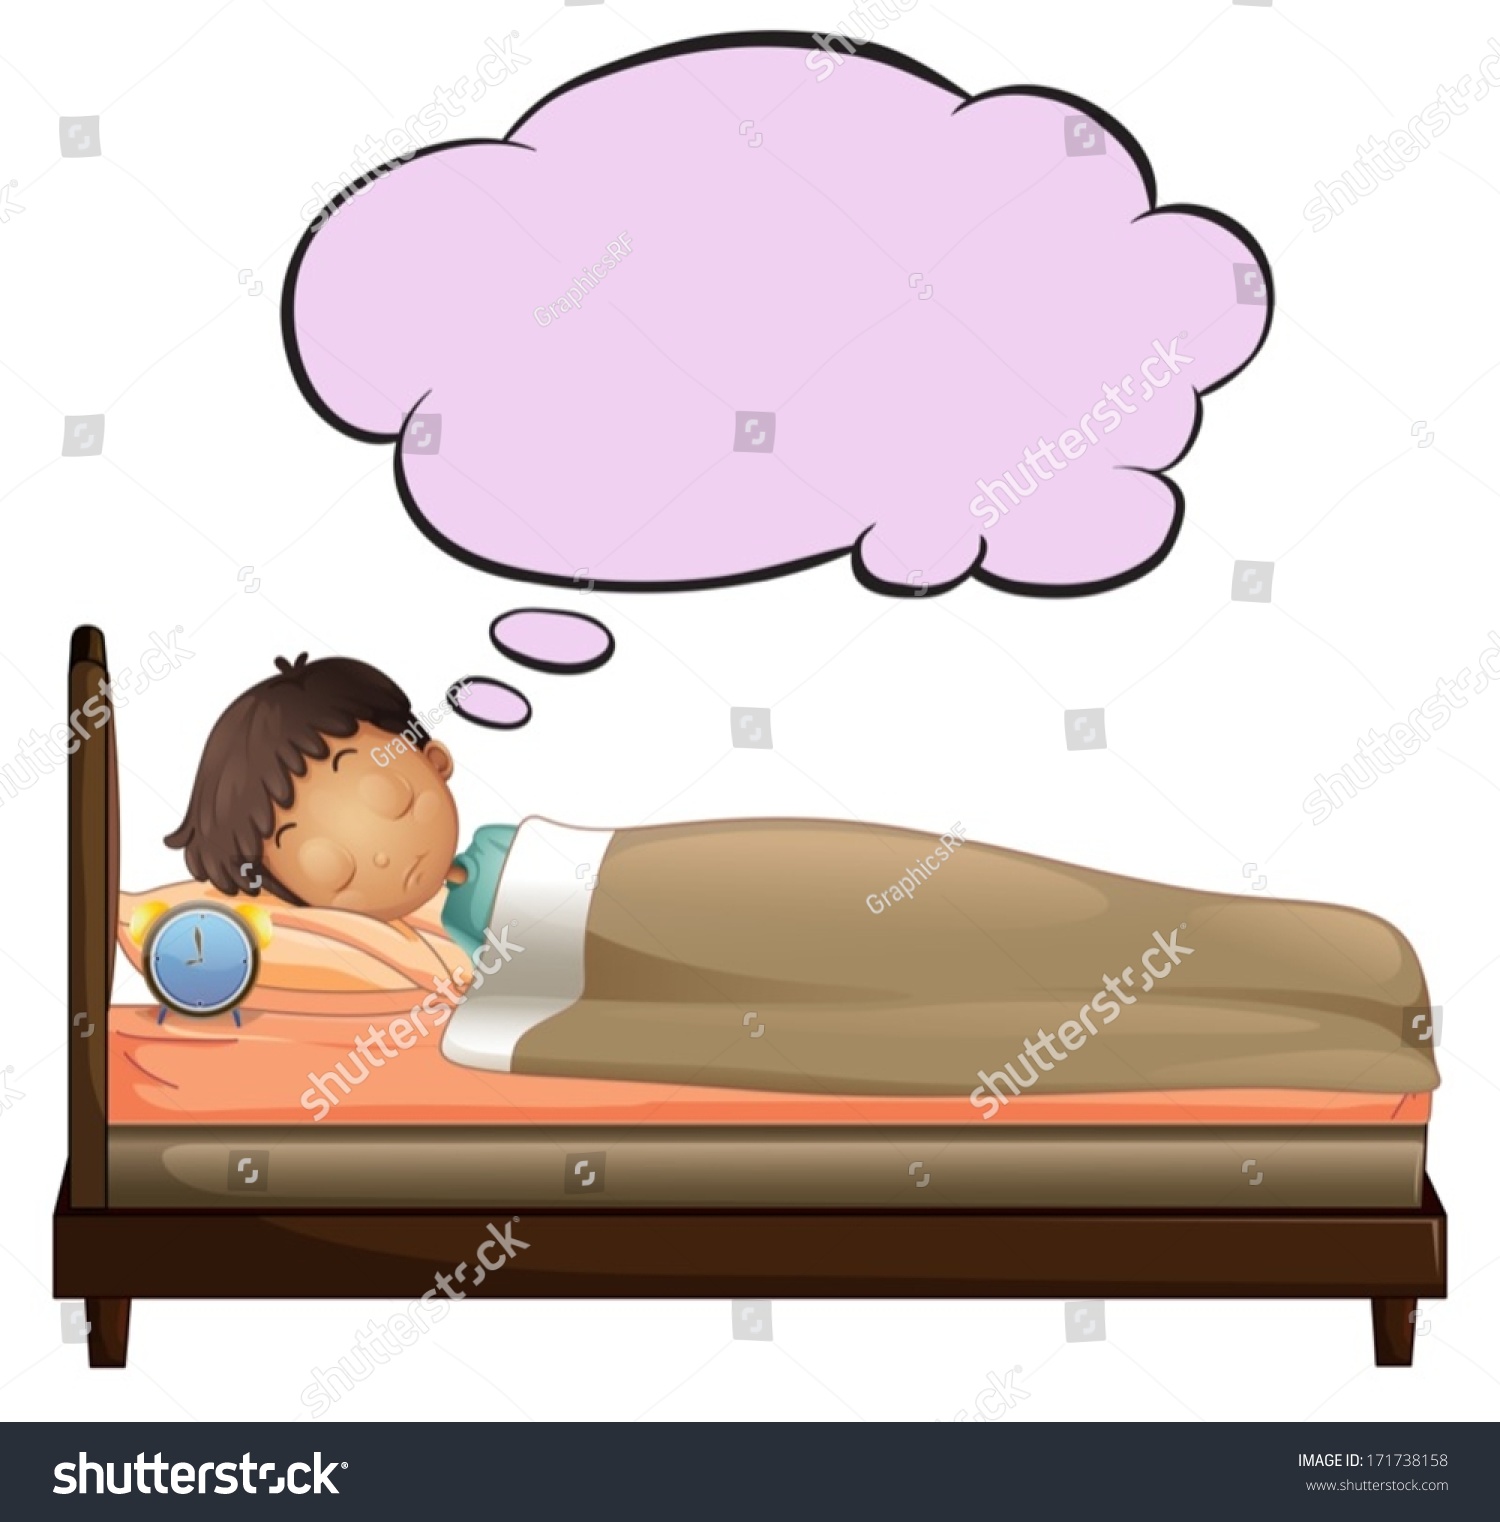 Illustration Of A Young Boy With An Empty Thought While Sleeping On A ...